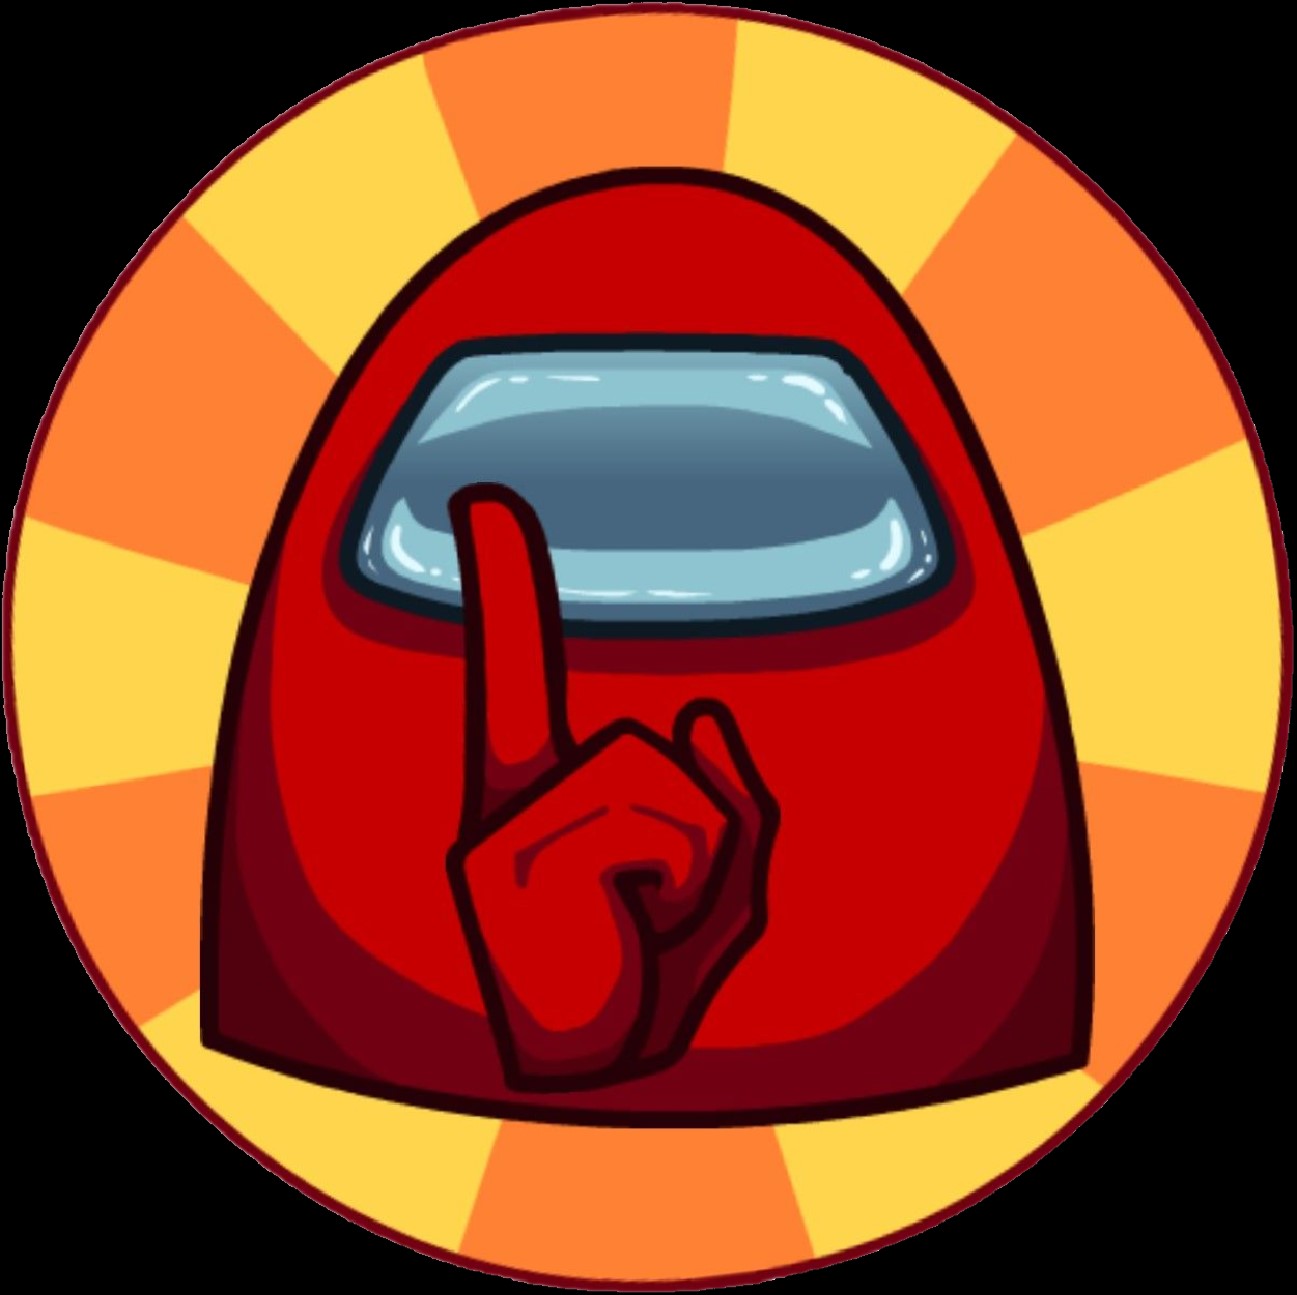 Shhh icon from Among Us